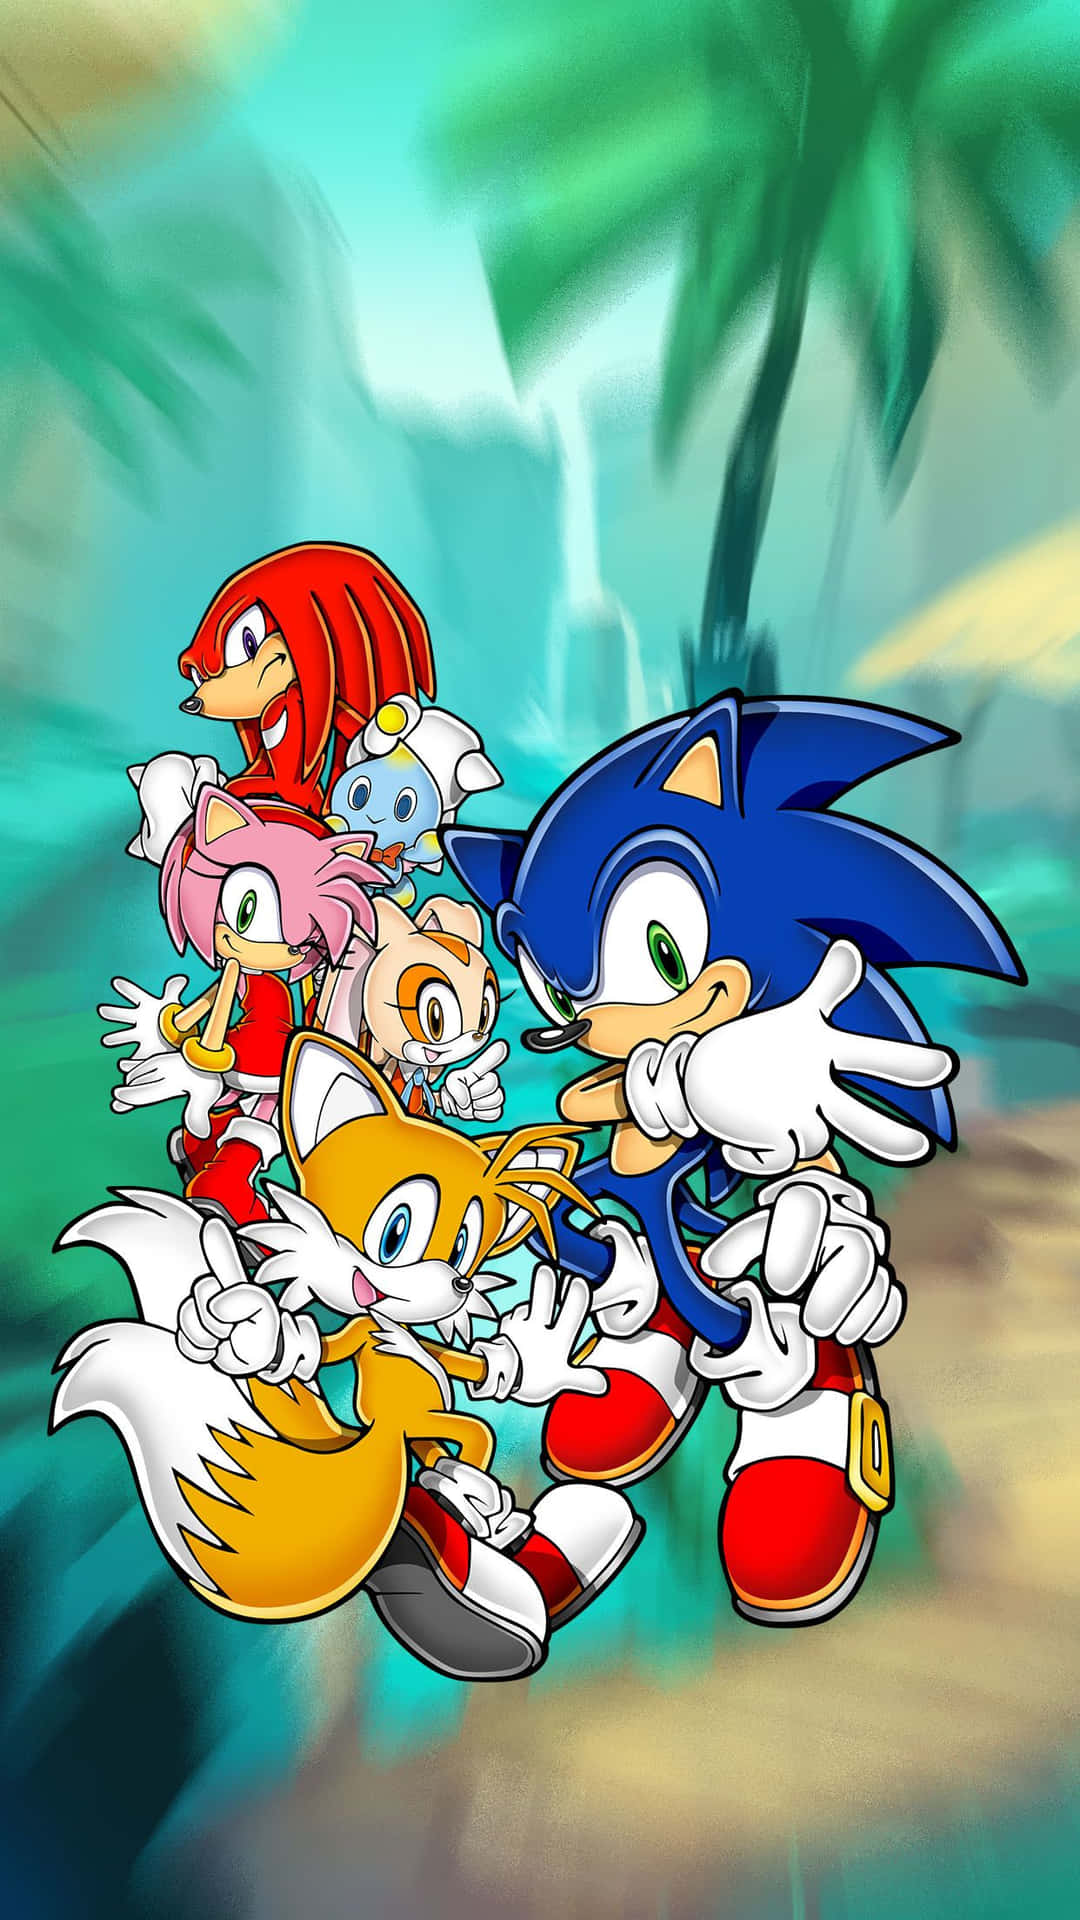 Sonic The Hedgehog And Friends Wallpaper  Sonic the hedgehog Friends  wallpaper Sonic